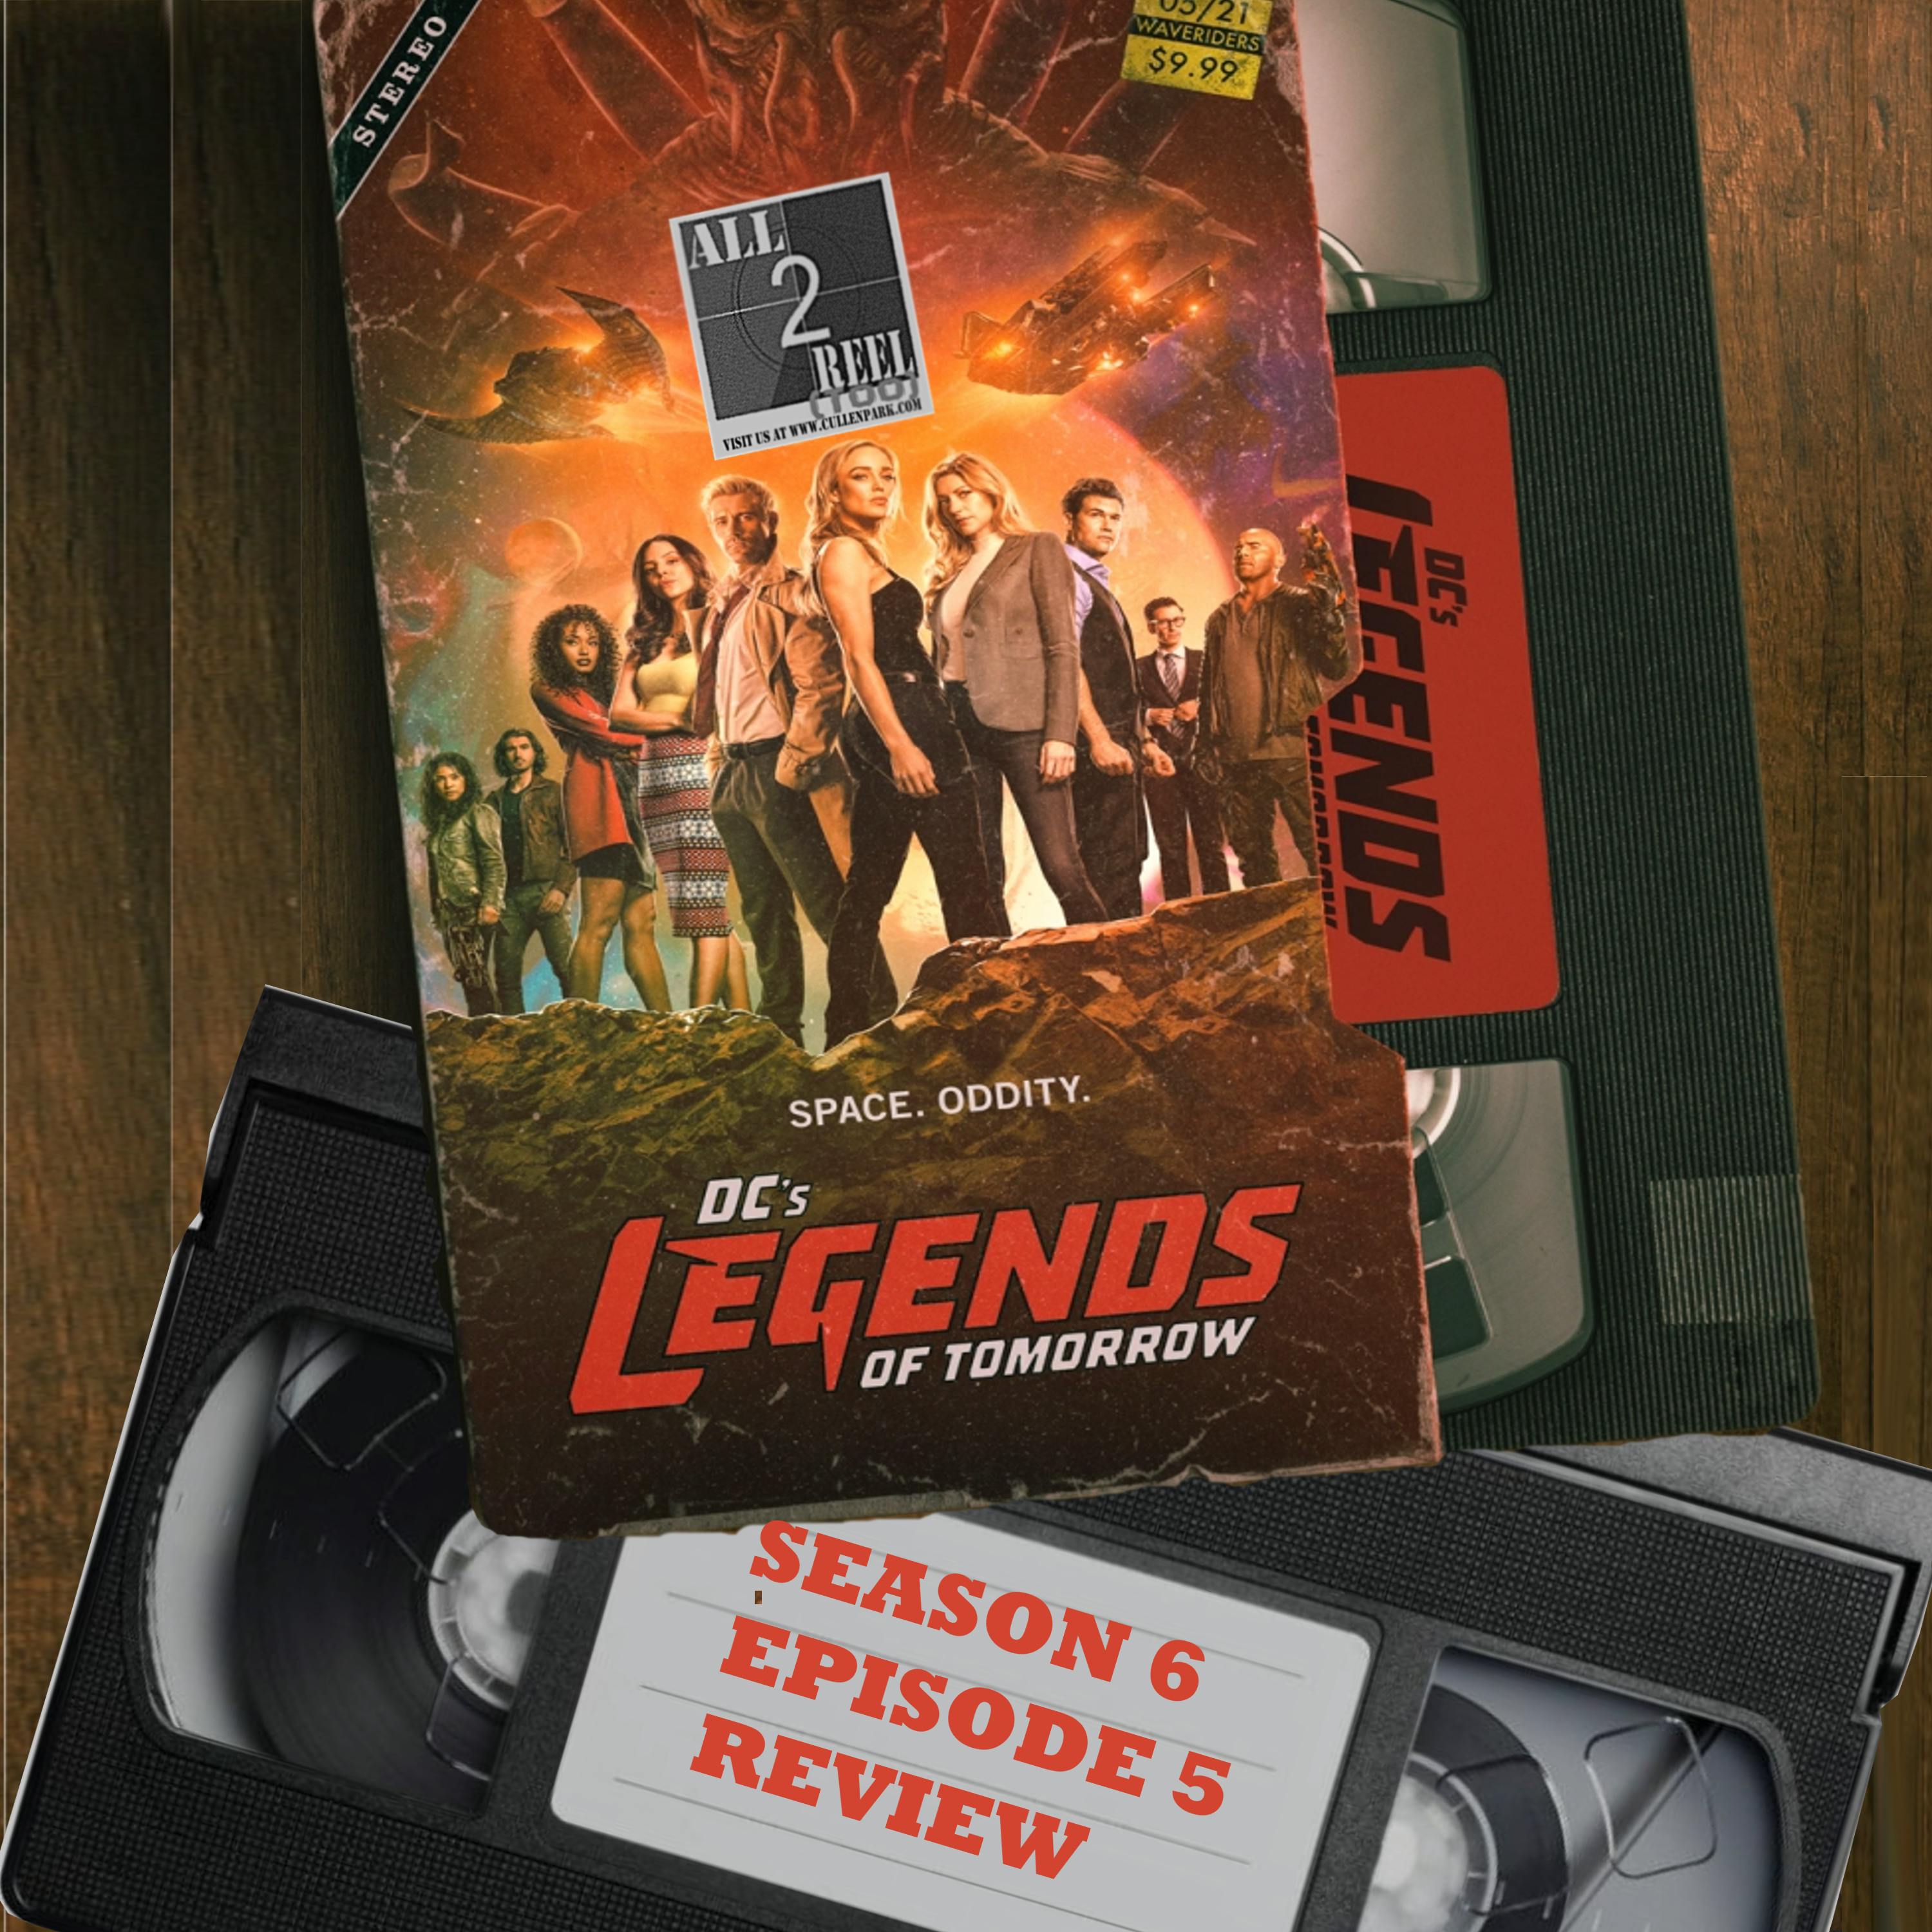 DC's Legends of Tomorrow SEASON 6 EPISODE 5 REVIEW Image